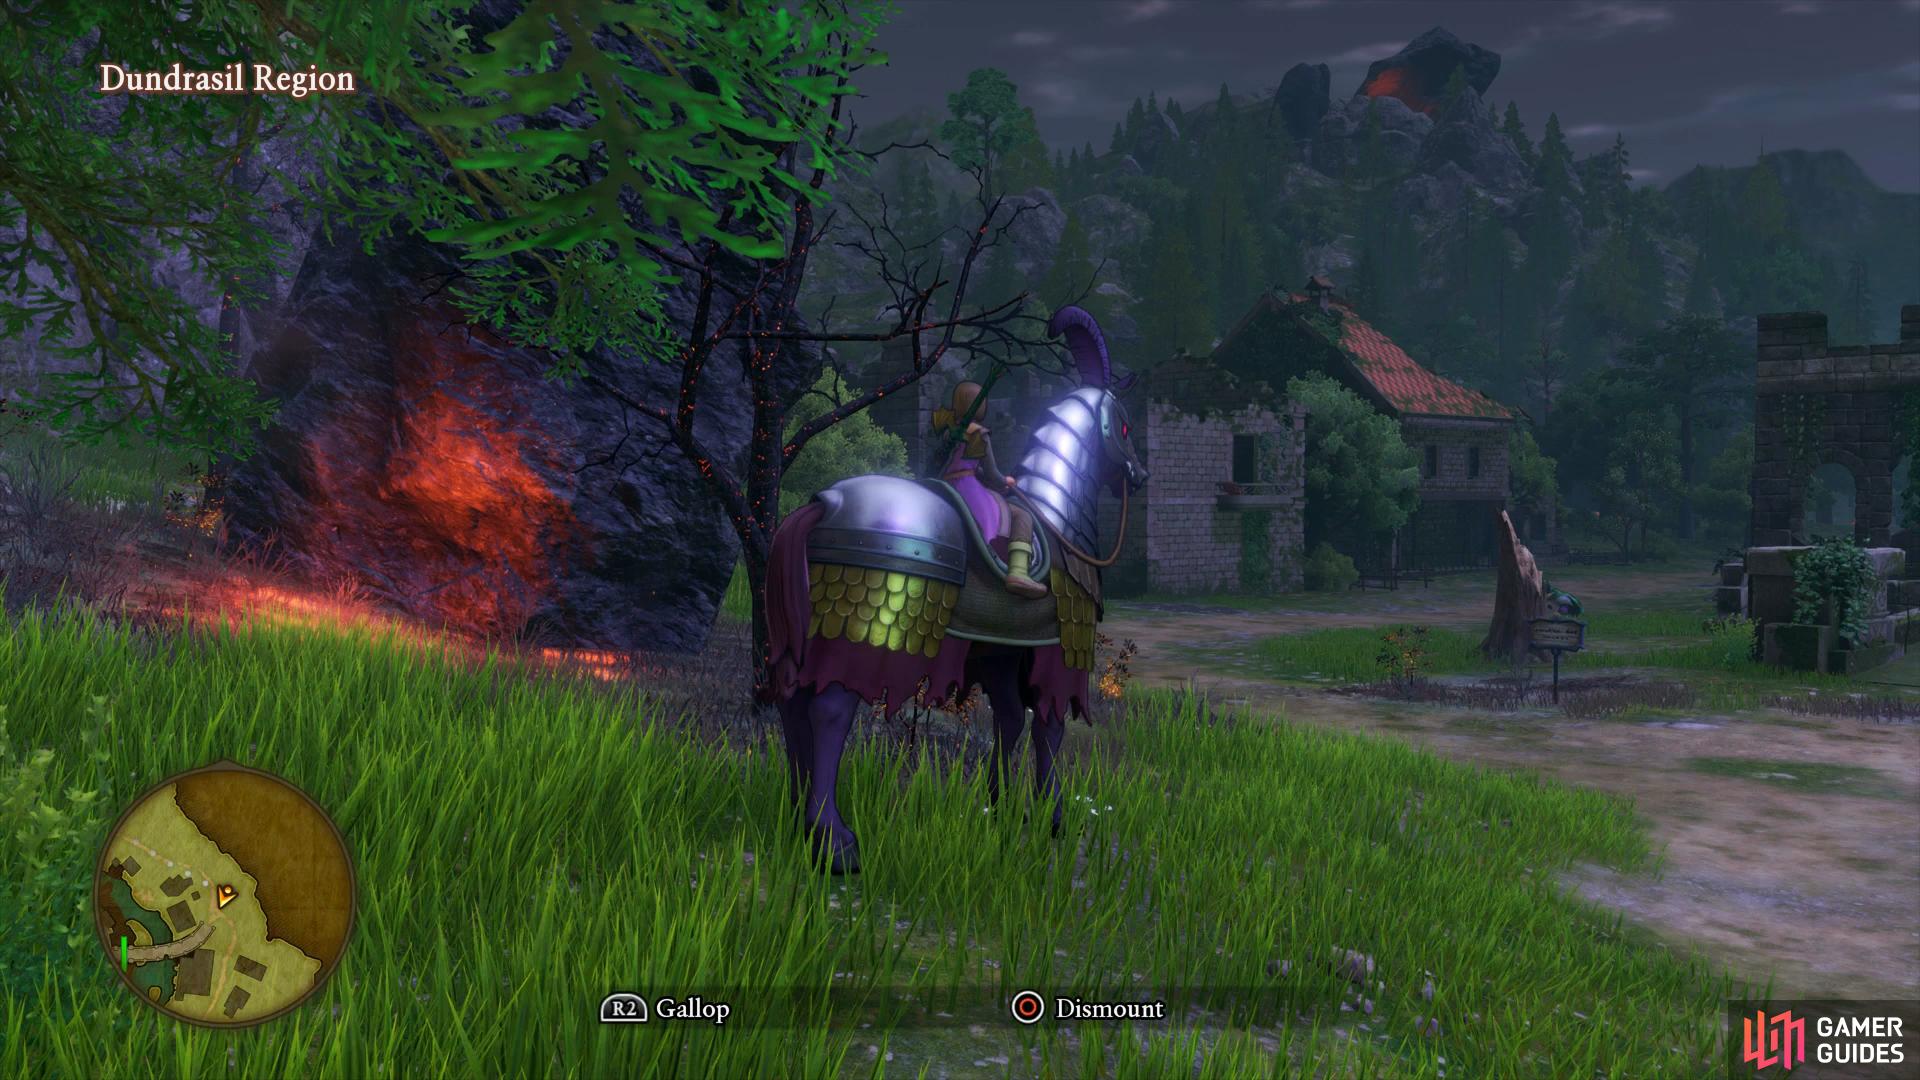 The Headless Horsemen should be the final mount you need for the Trophy.